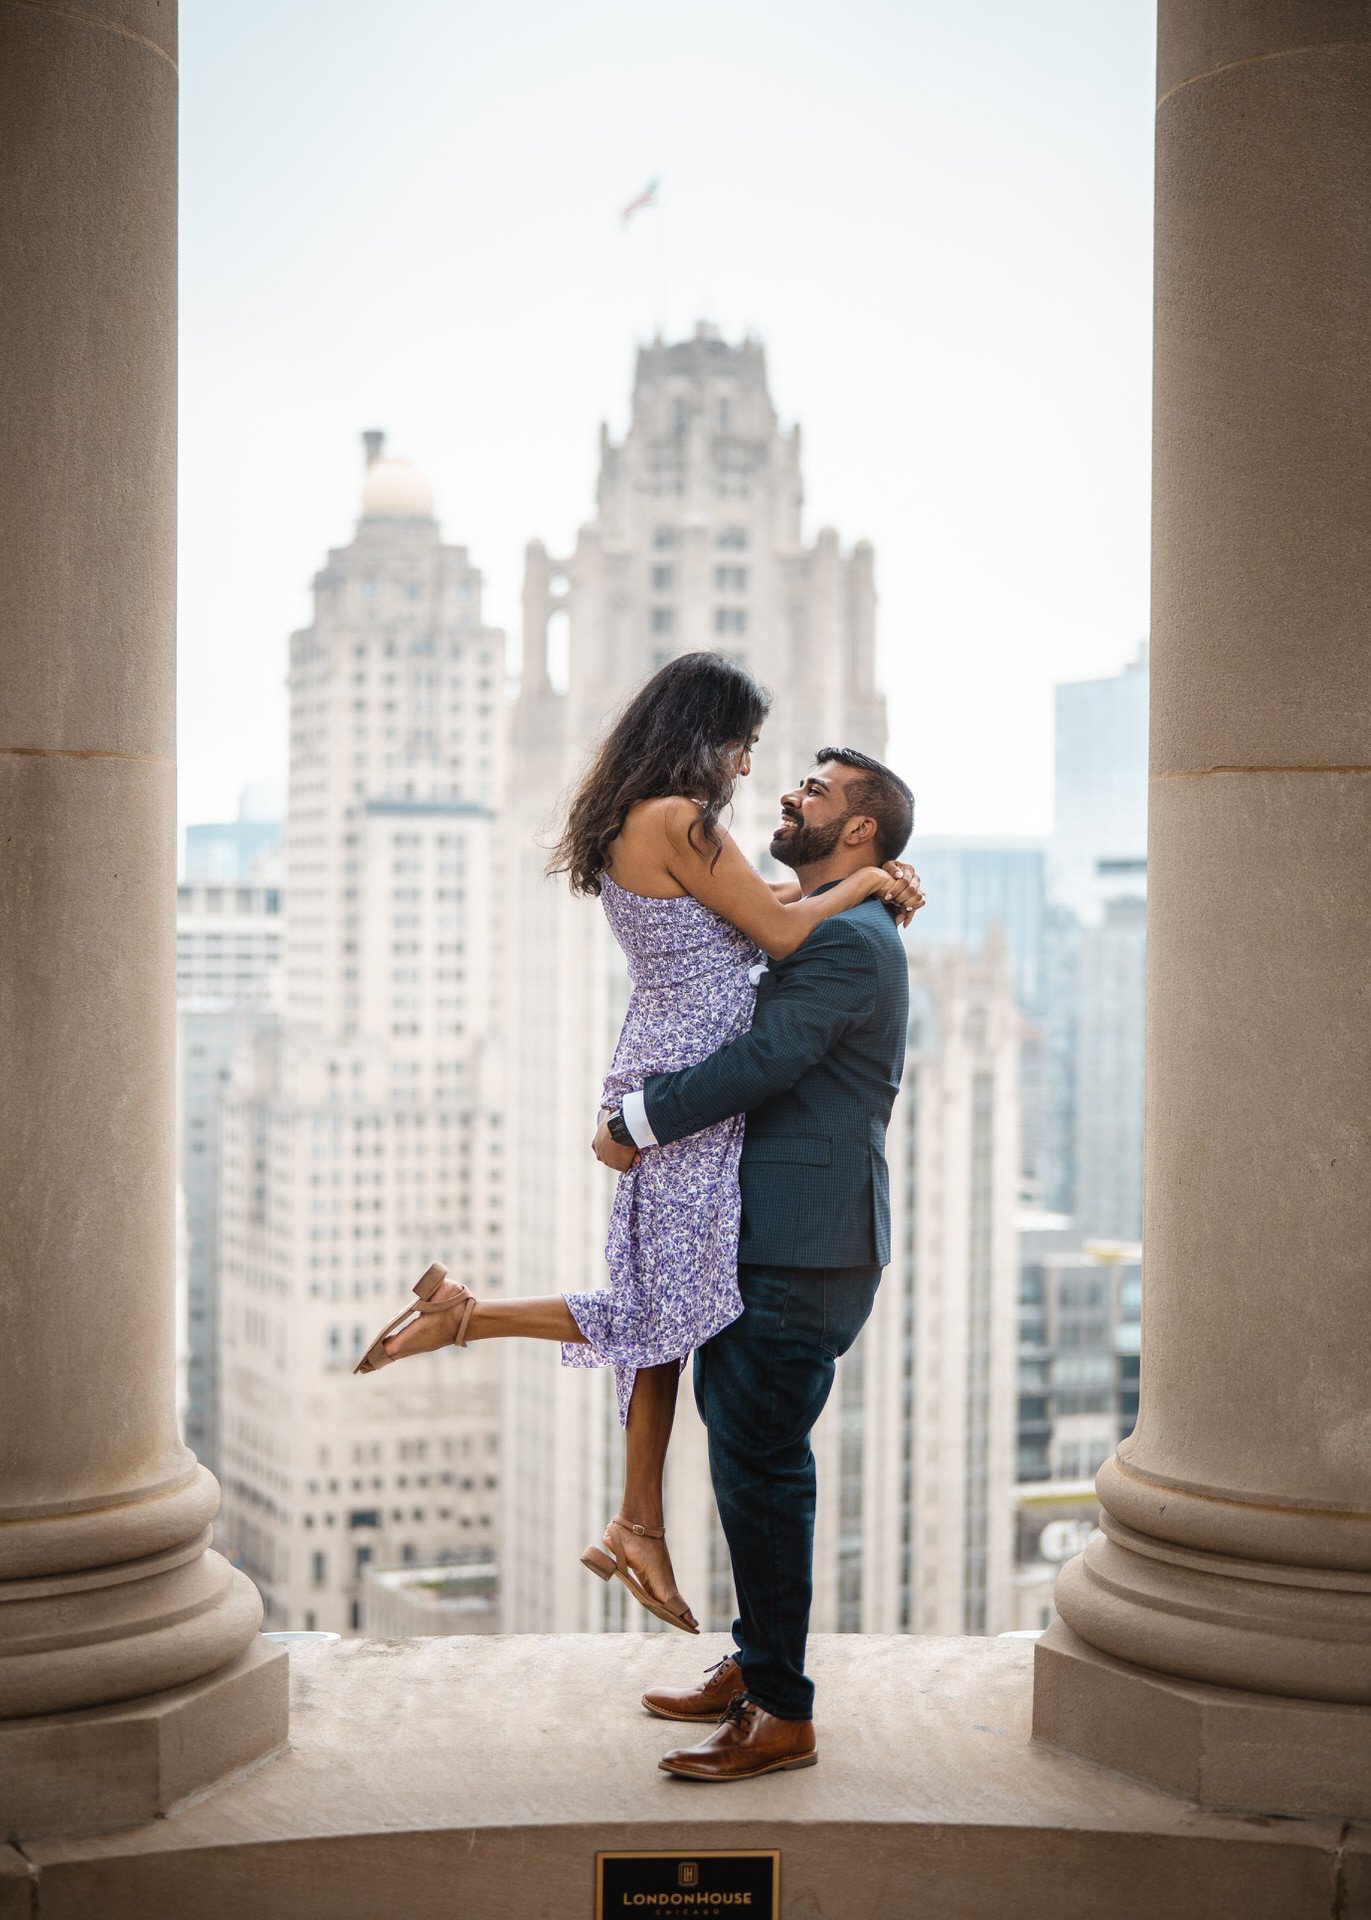 How to Propose at Lincoln Park Honeycomb Chicago — Caleb Schaftlein  Photography